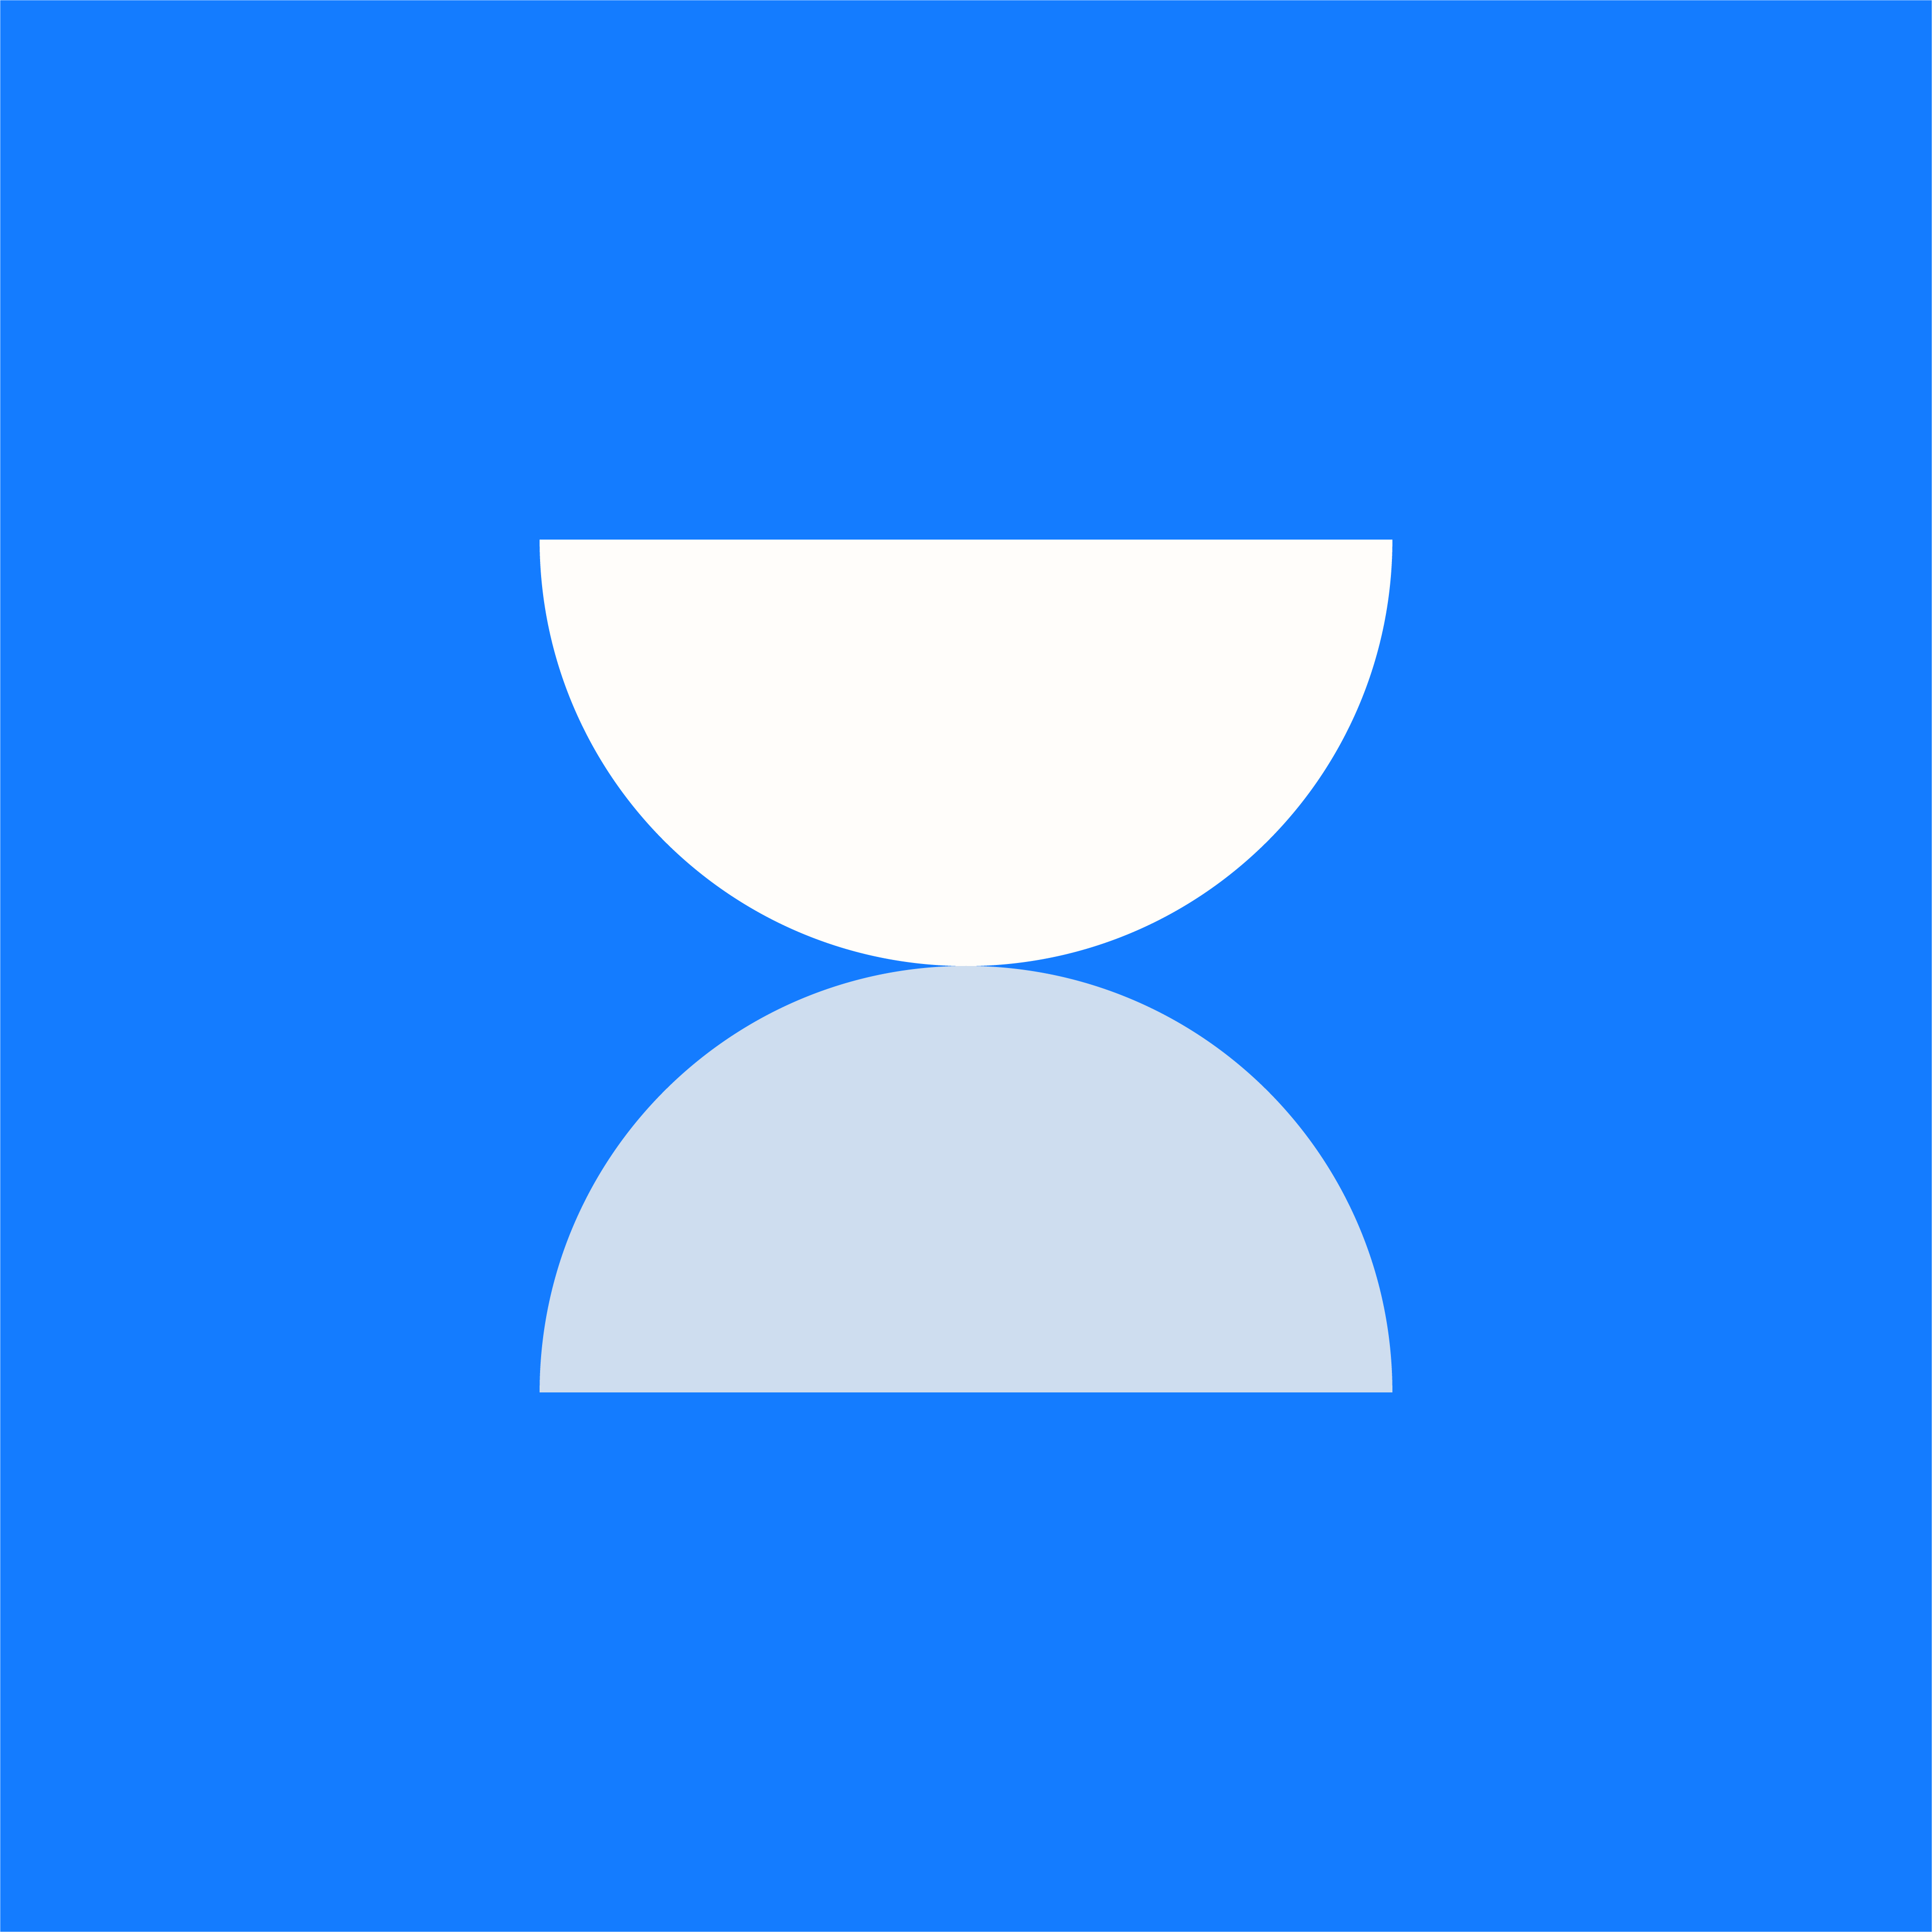 A white bowl on a blue background

Description automatically generated with medium confidence